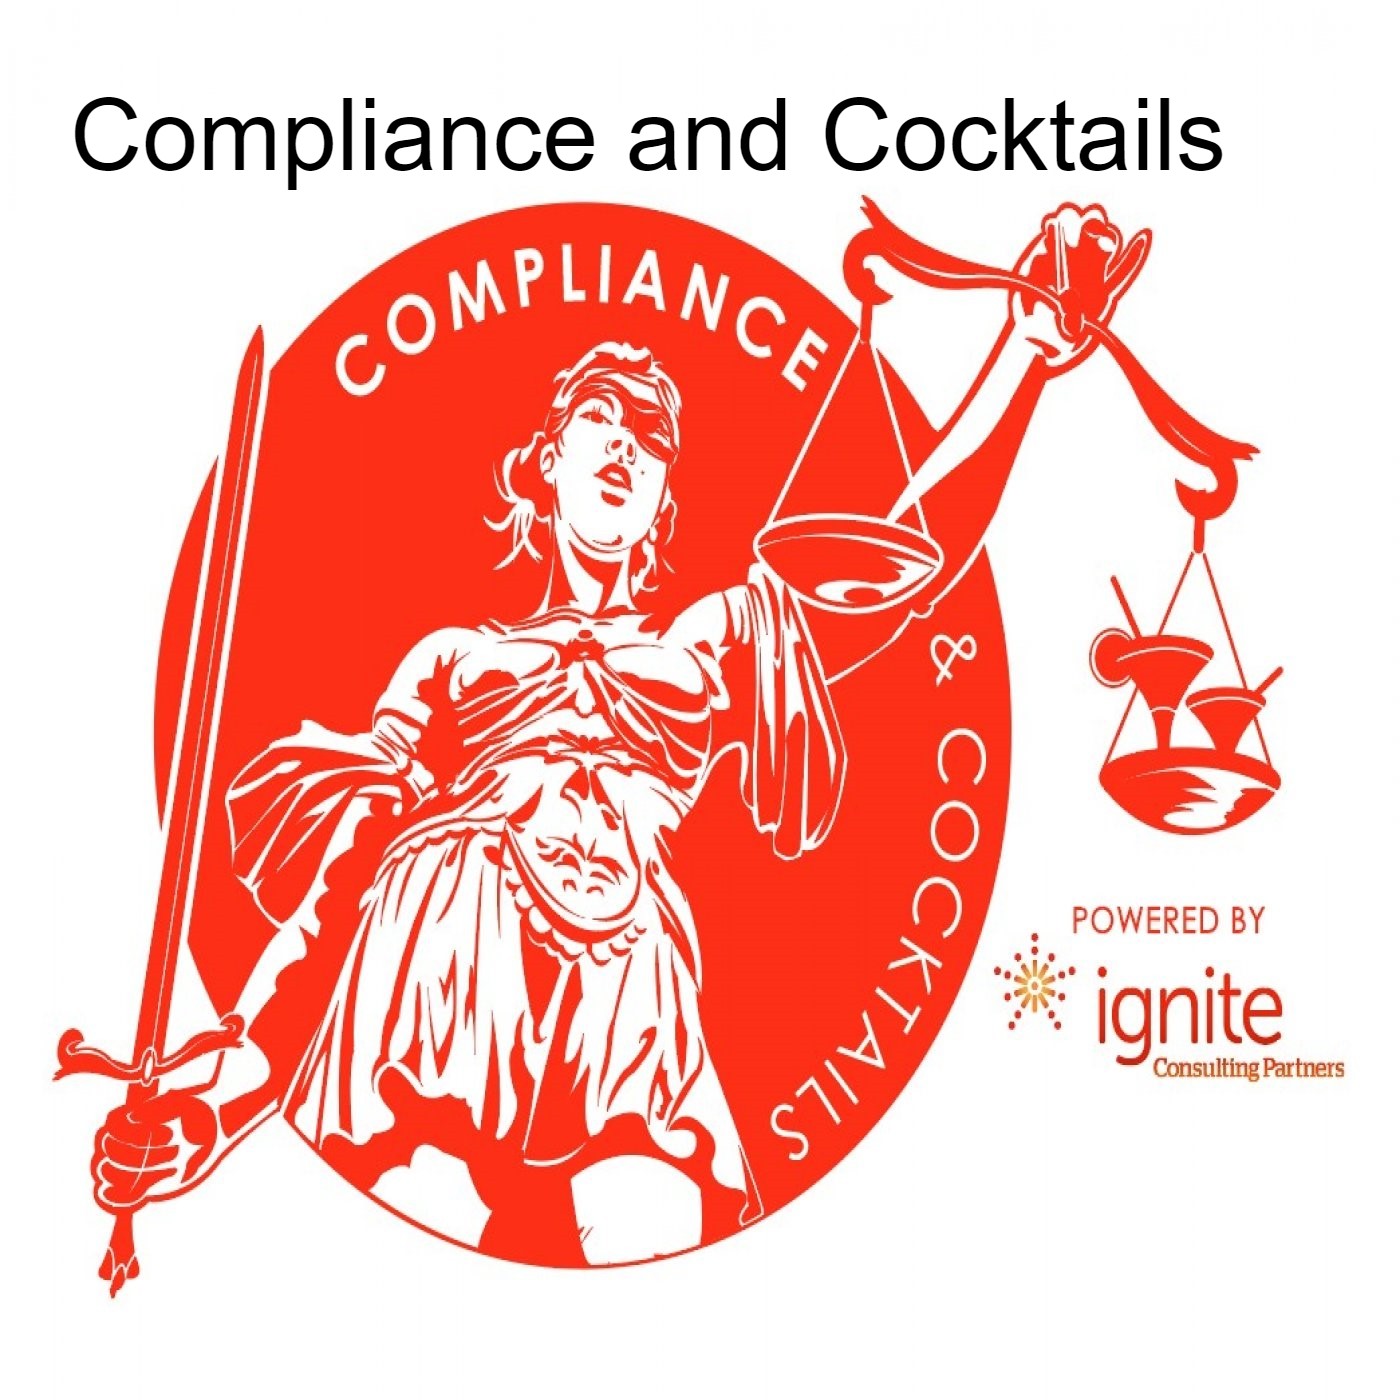 Compliance and Cocktails